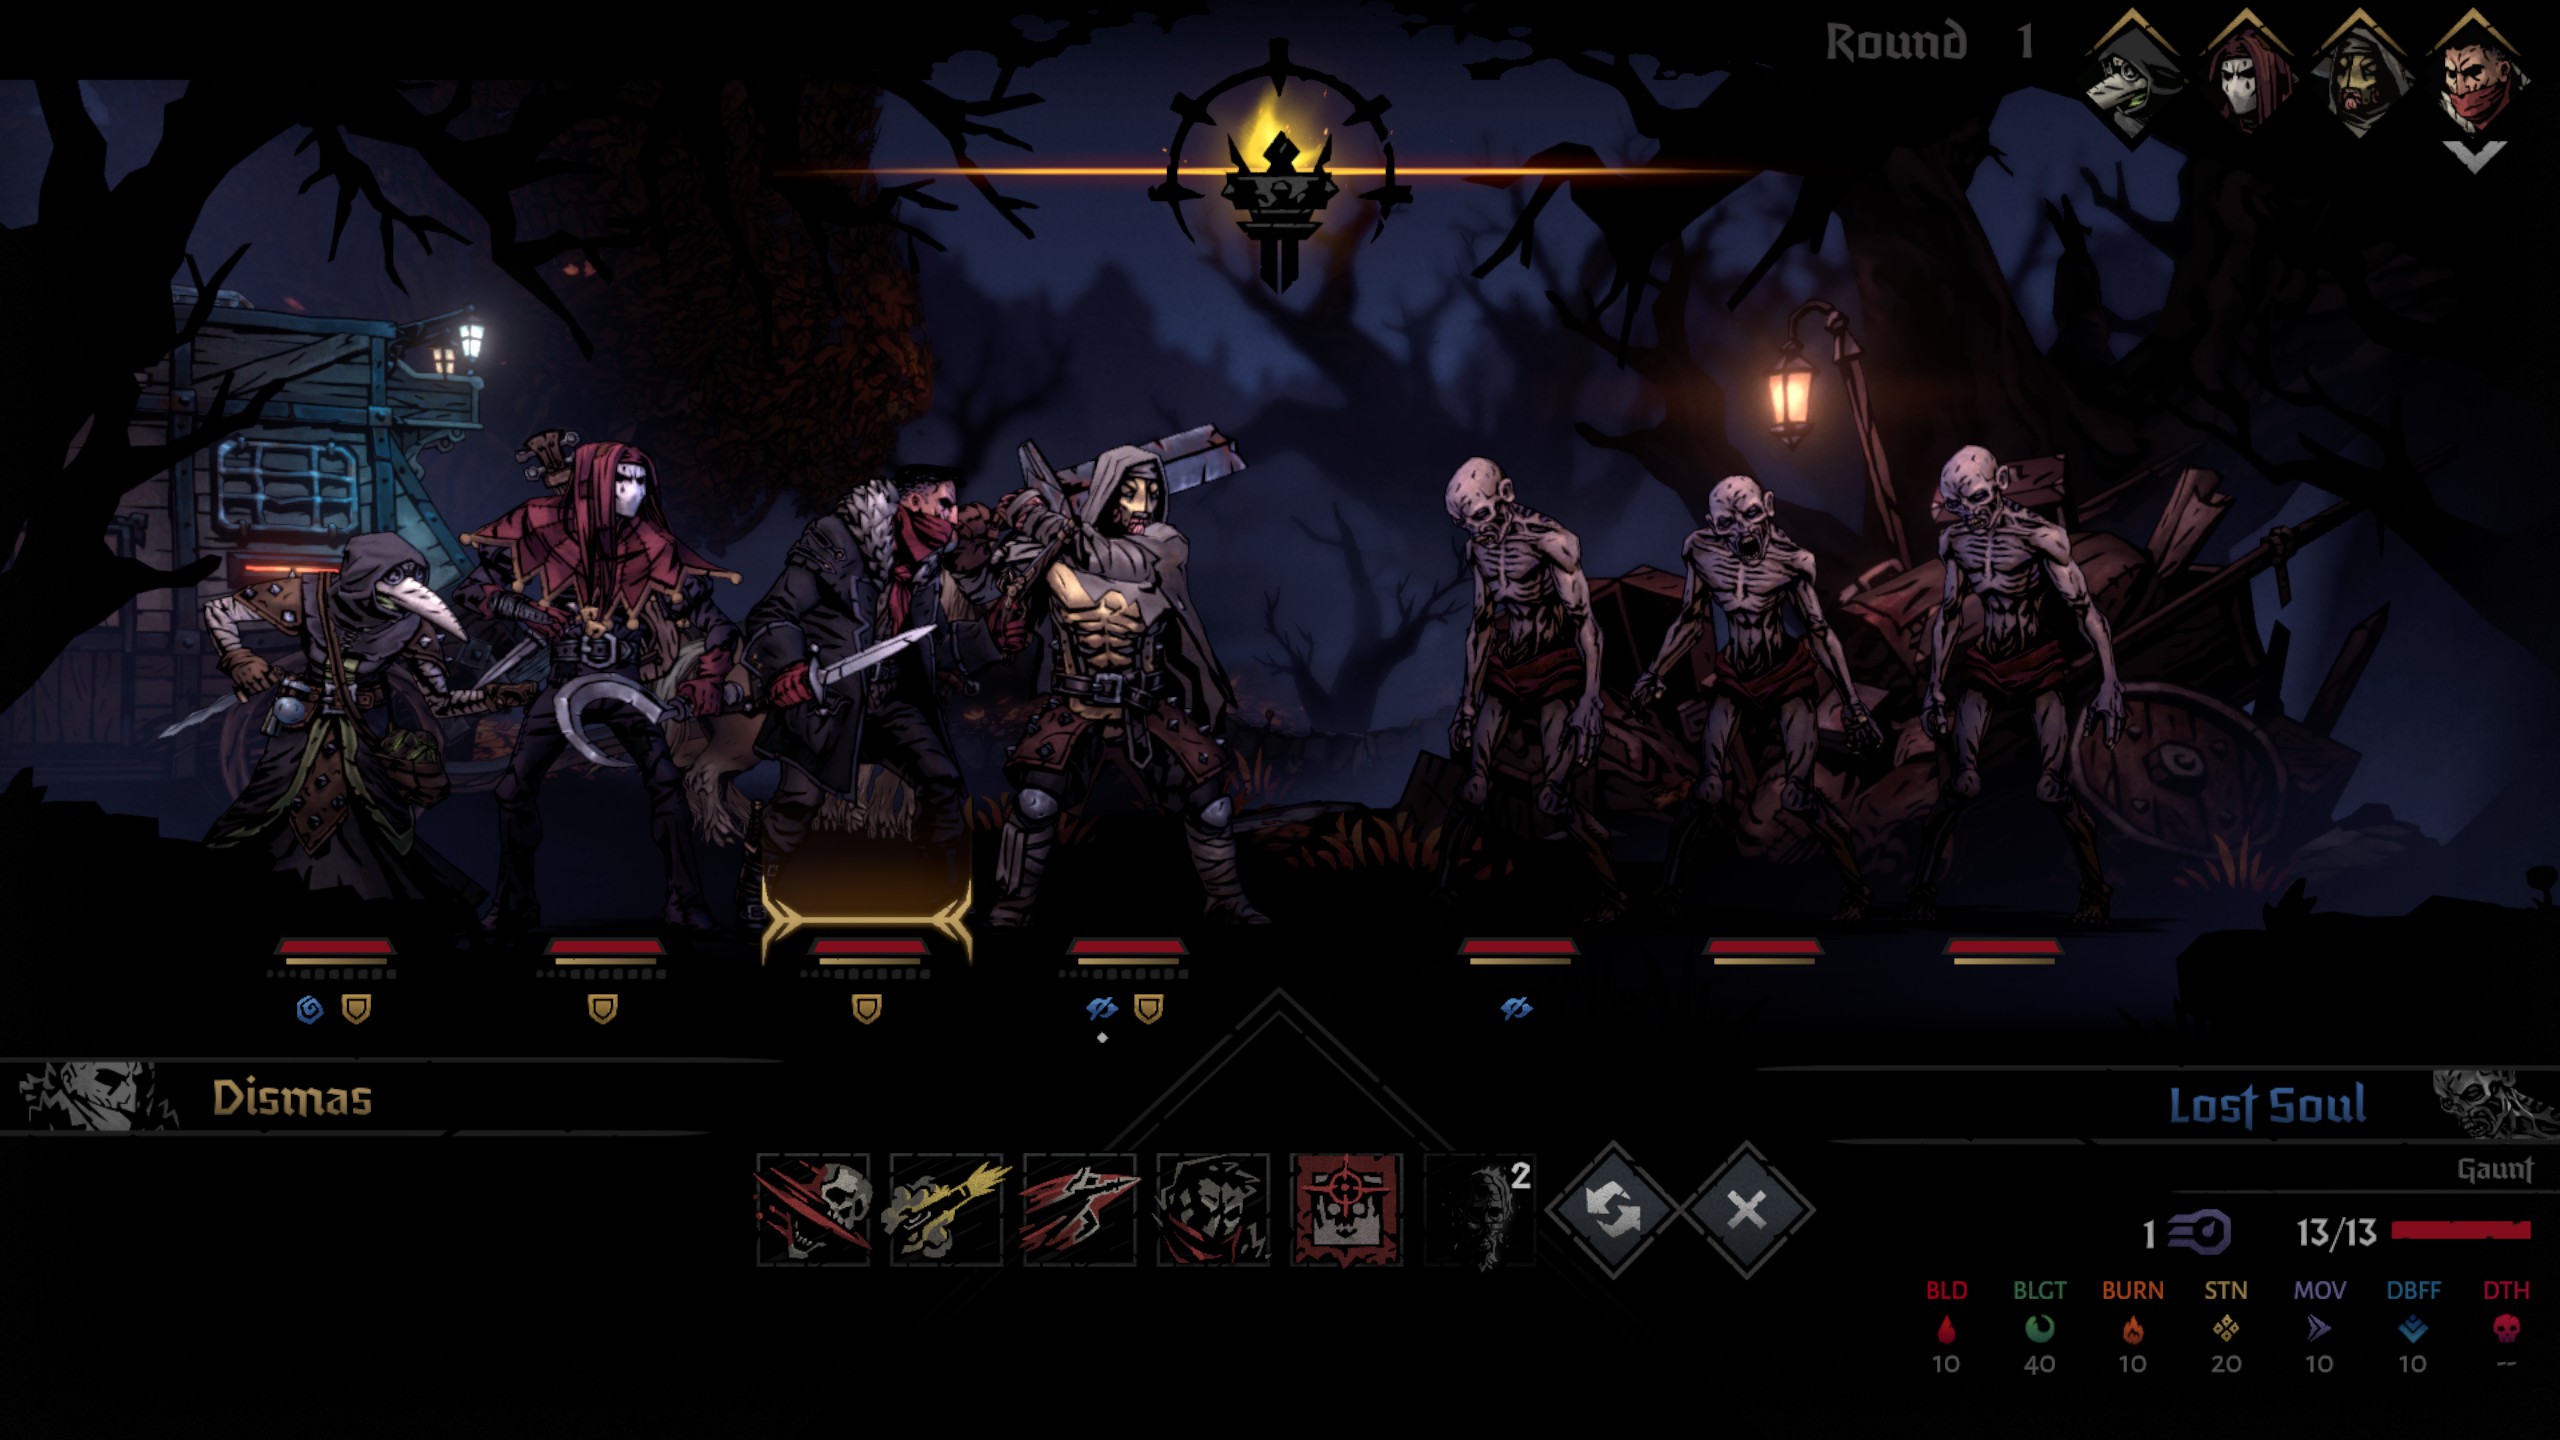 Darkest Dungeon 2 is an awkward sequel, but I can't stop playing